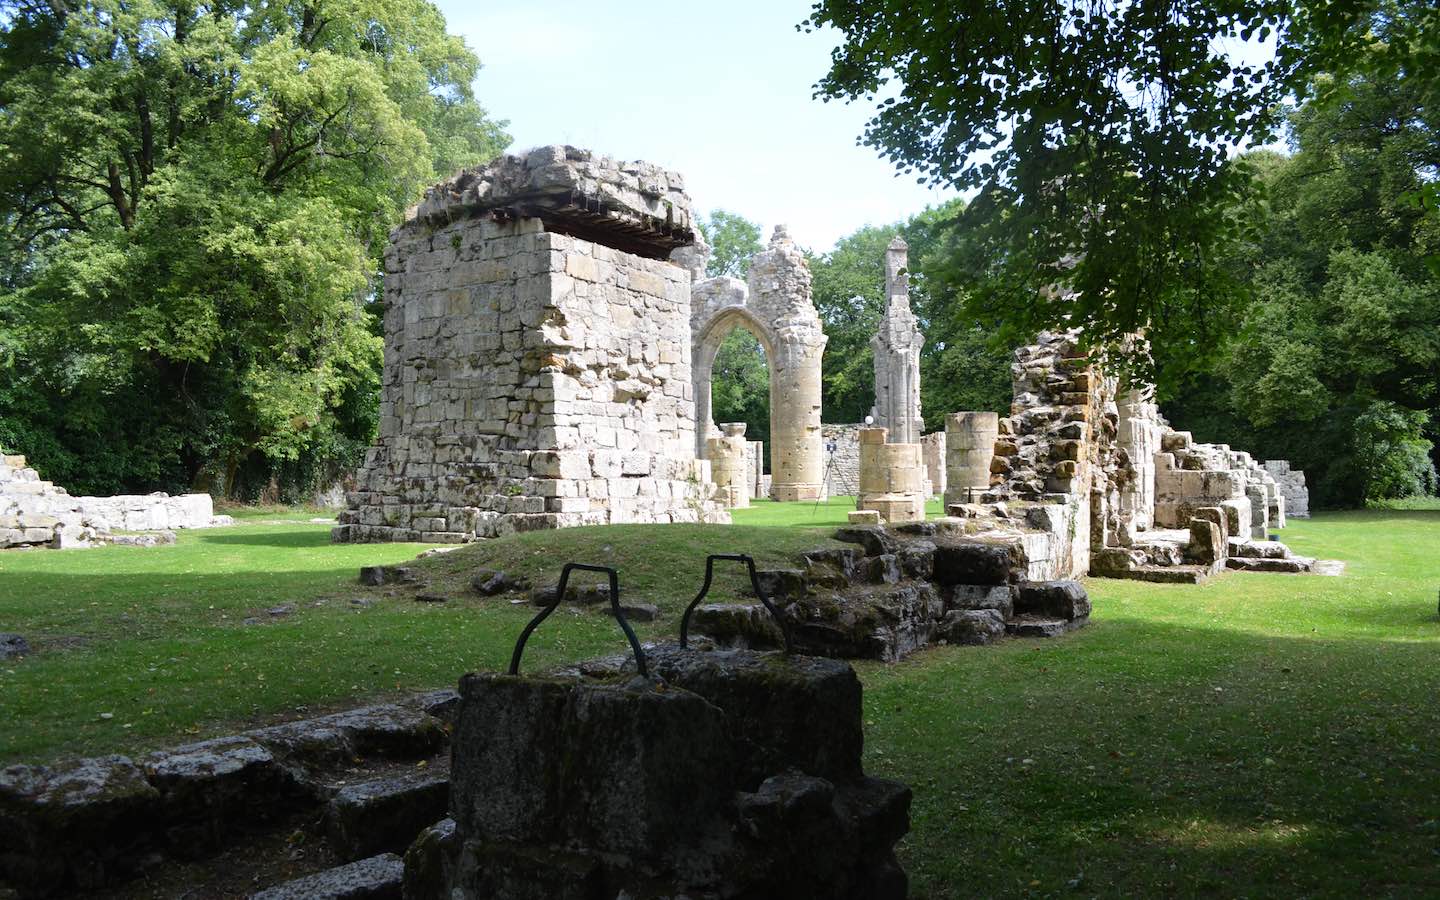 The ruins of Montfaucon